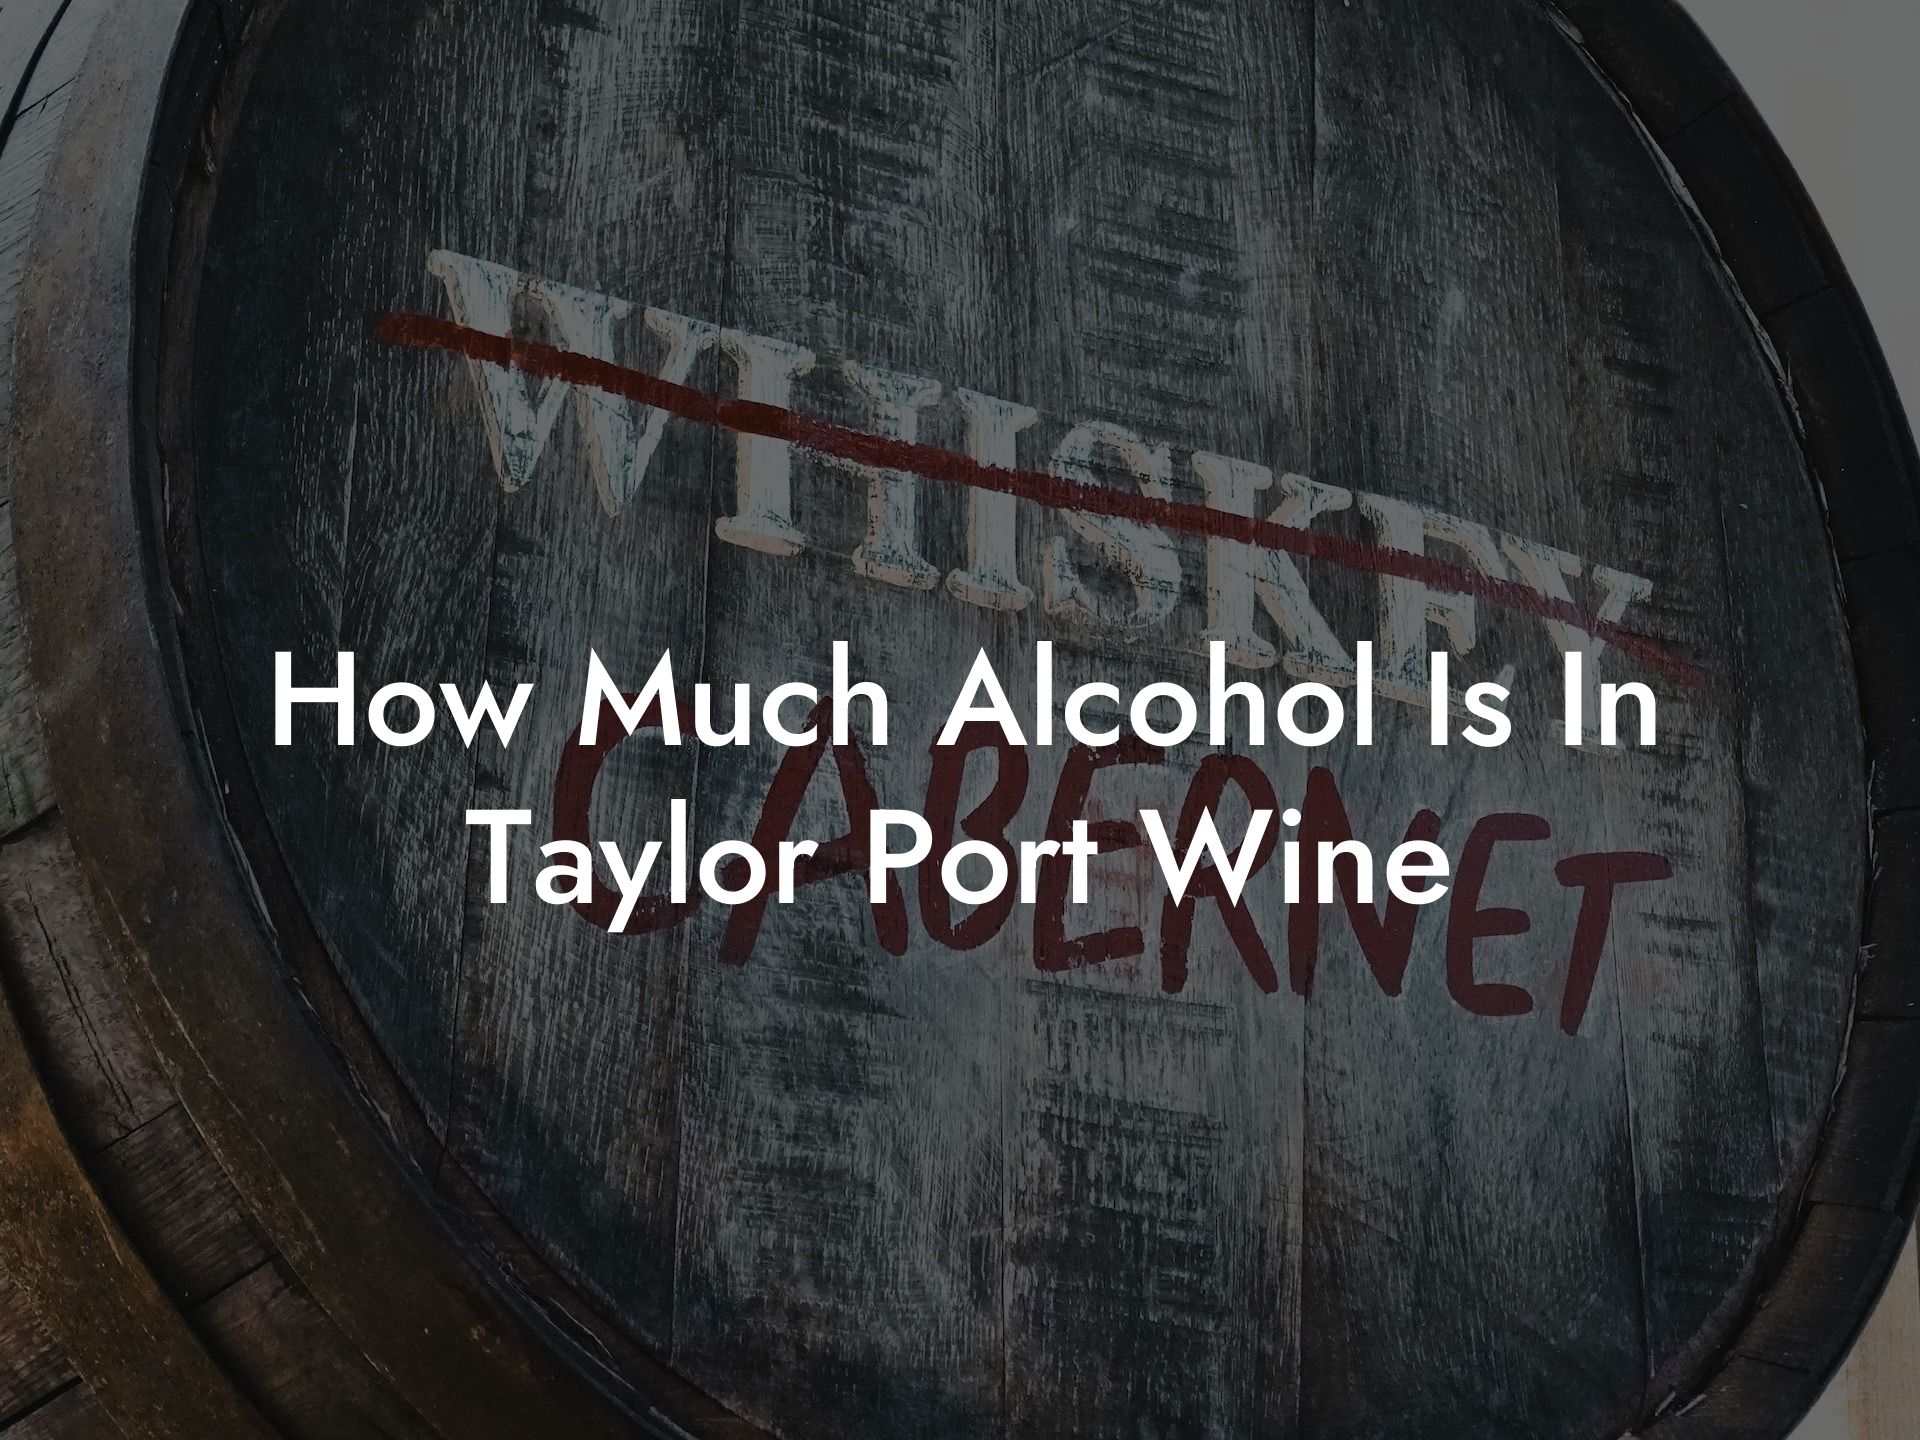 How Much Alcohol Is In Taylor Port Wine